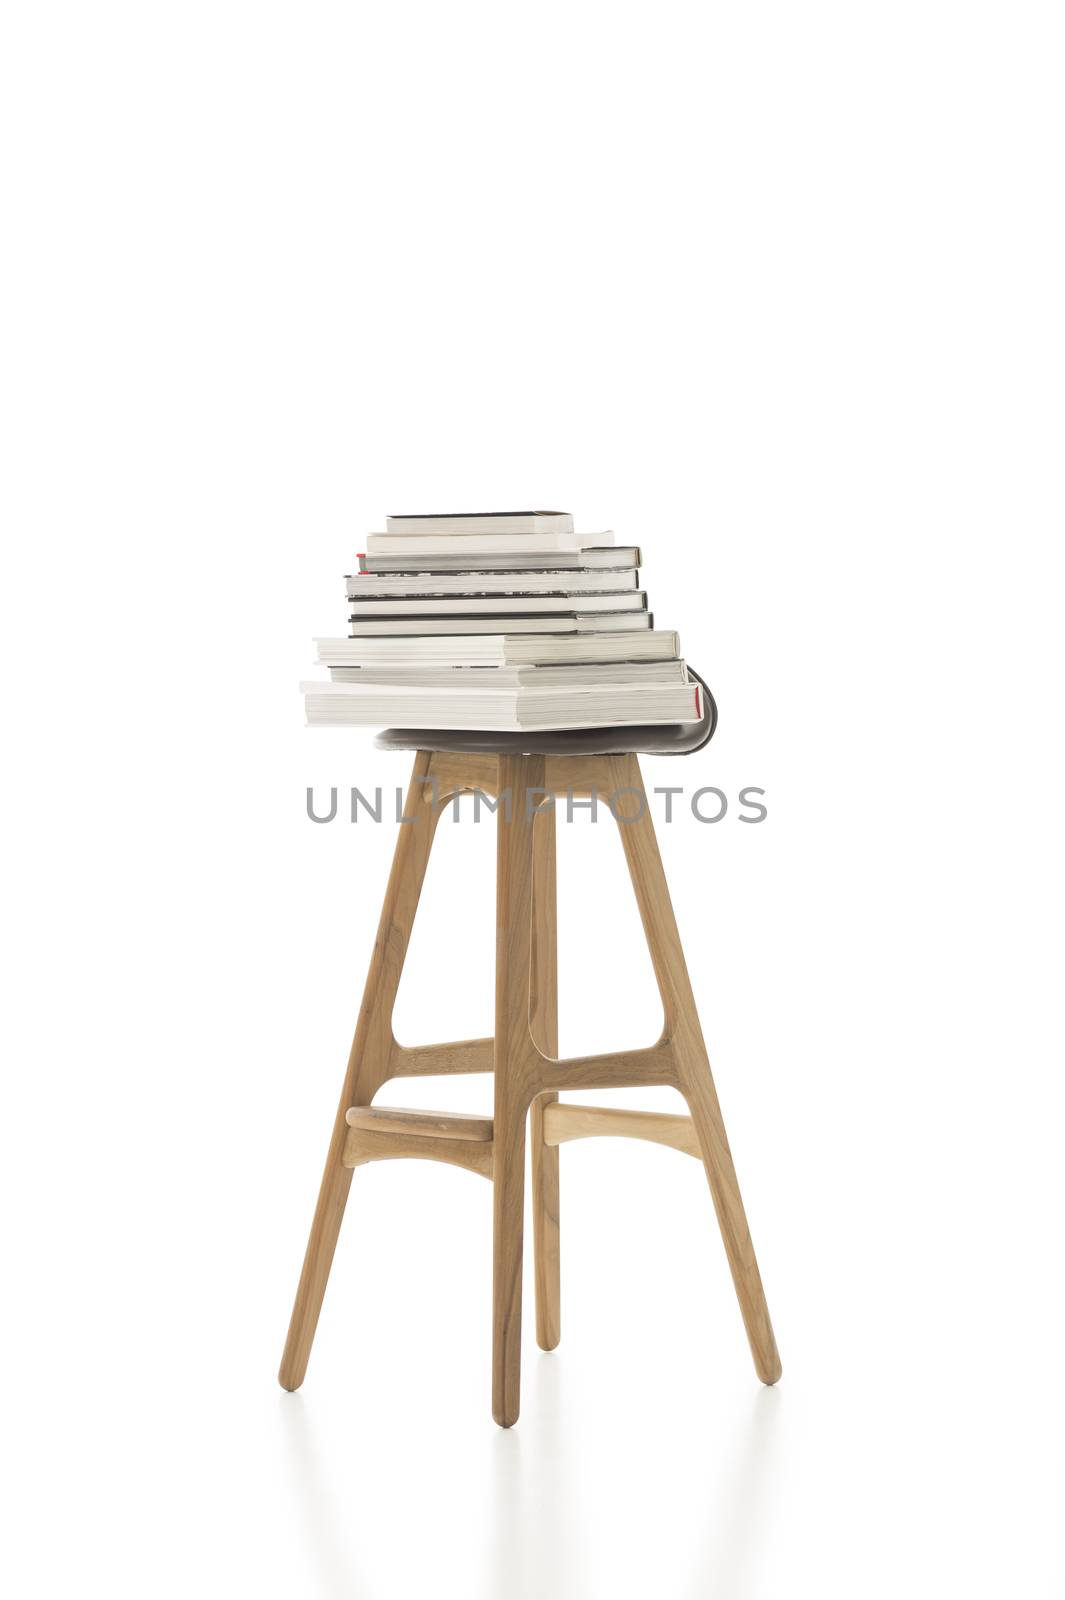 Conceptual Piled Books on Top of Tall Single Chair, with Wooden Legs, Isolated on White Background. Emphasizing Copy Space.